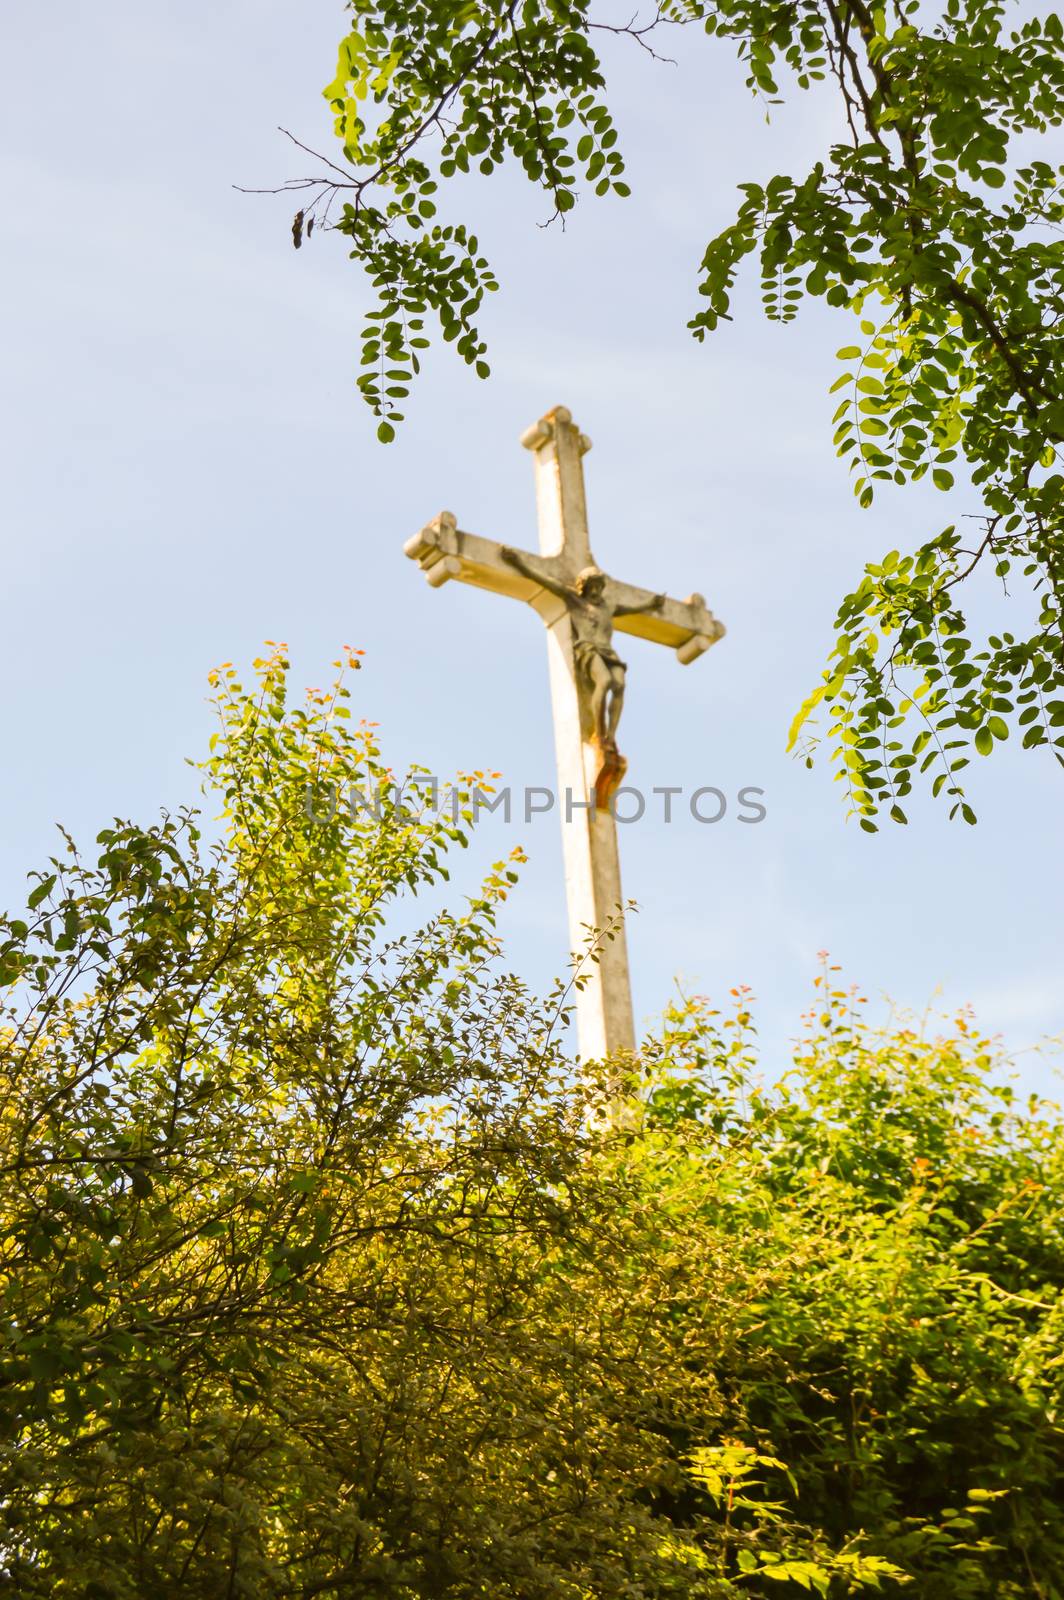 Great cross of Jesus Christ in the woods  by Philou1000